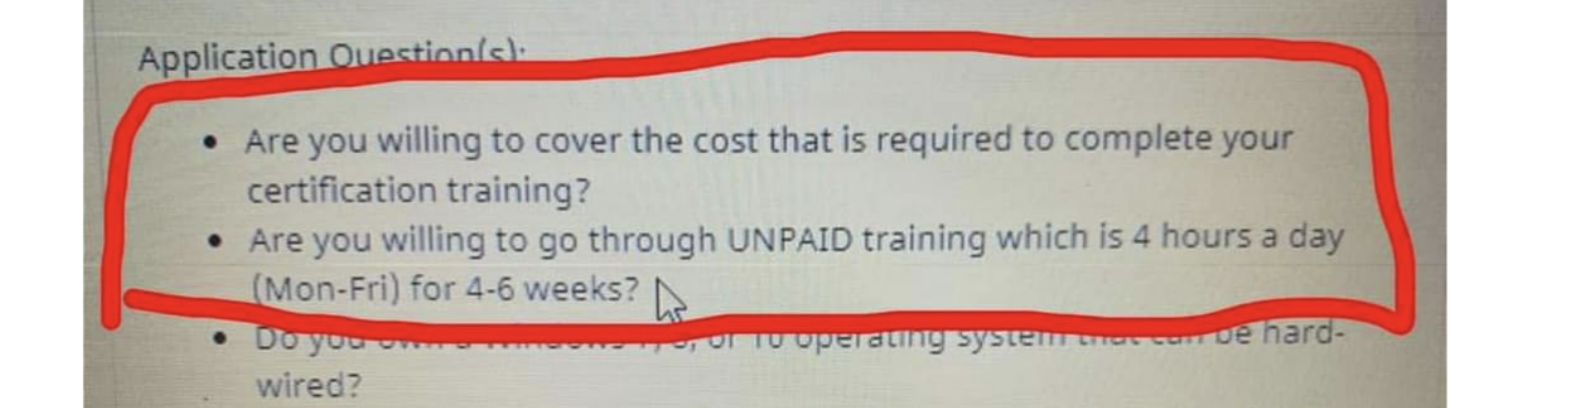 Application question highlighted asking about covering training costs and availability for a 4-6 week UNPAID training program